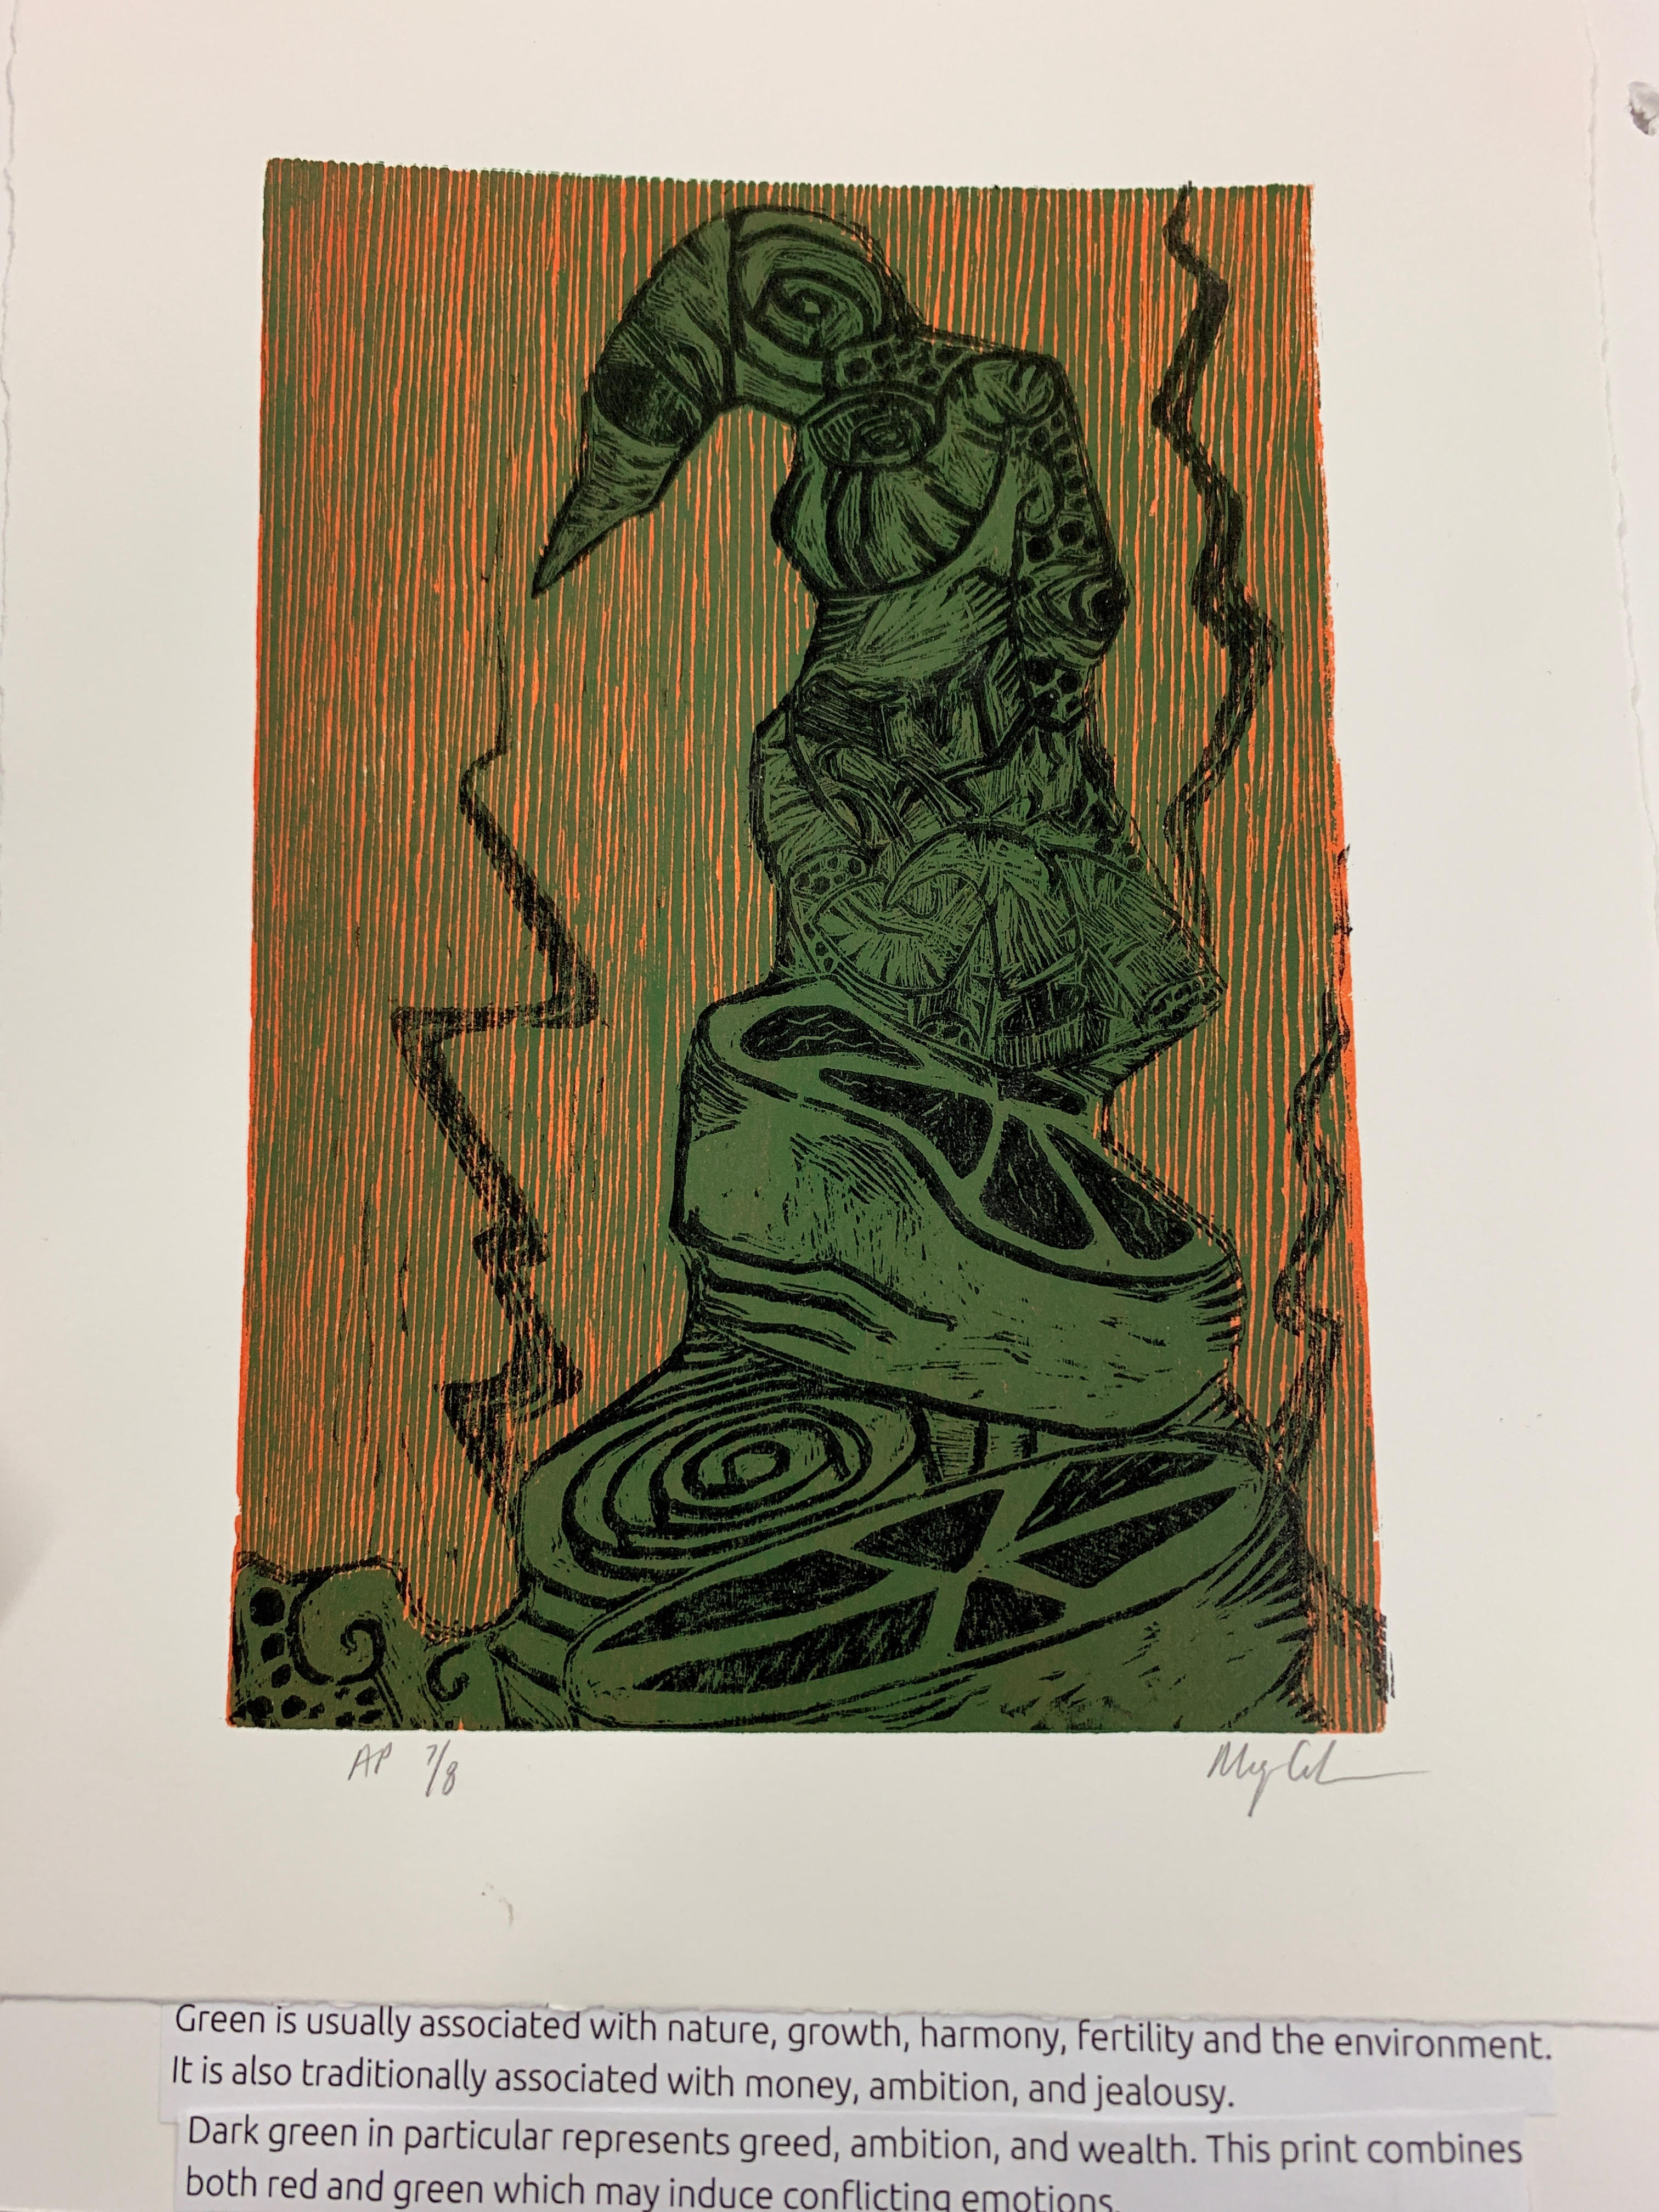 Page 5. Caption: In American society, green is typically associated with nature, growth, harmony, fertility, and the environment. It also signifies money, ambition and jealousy. The dark green presented in this abstract print is associated with greed, wealth, and ambition. The background usage of red with the predominant dark green may cause a calming and warming affect.